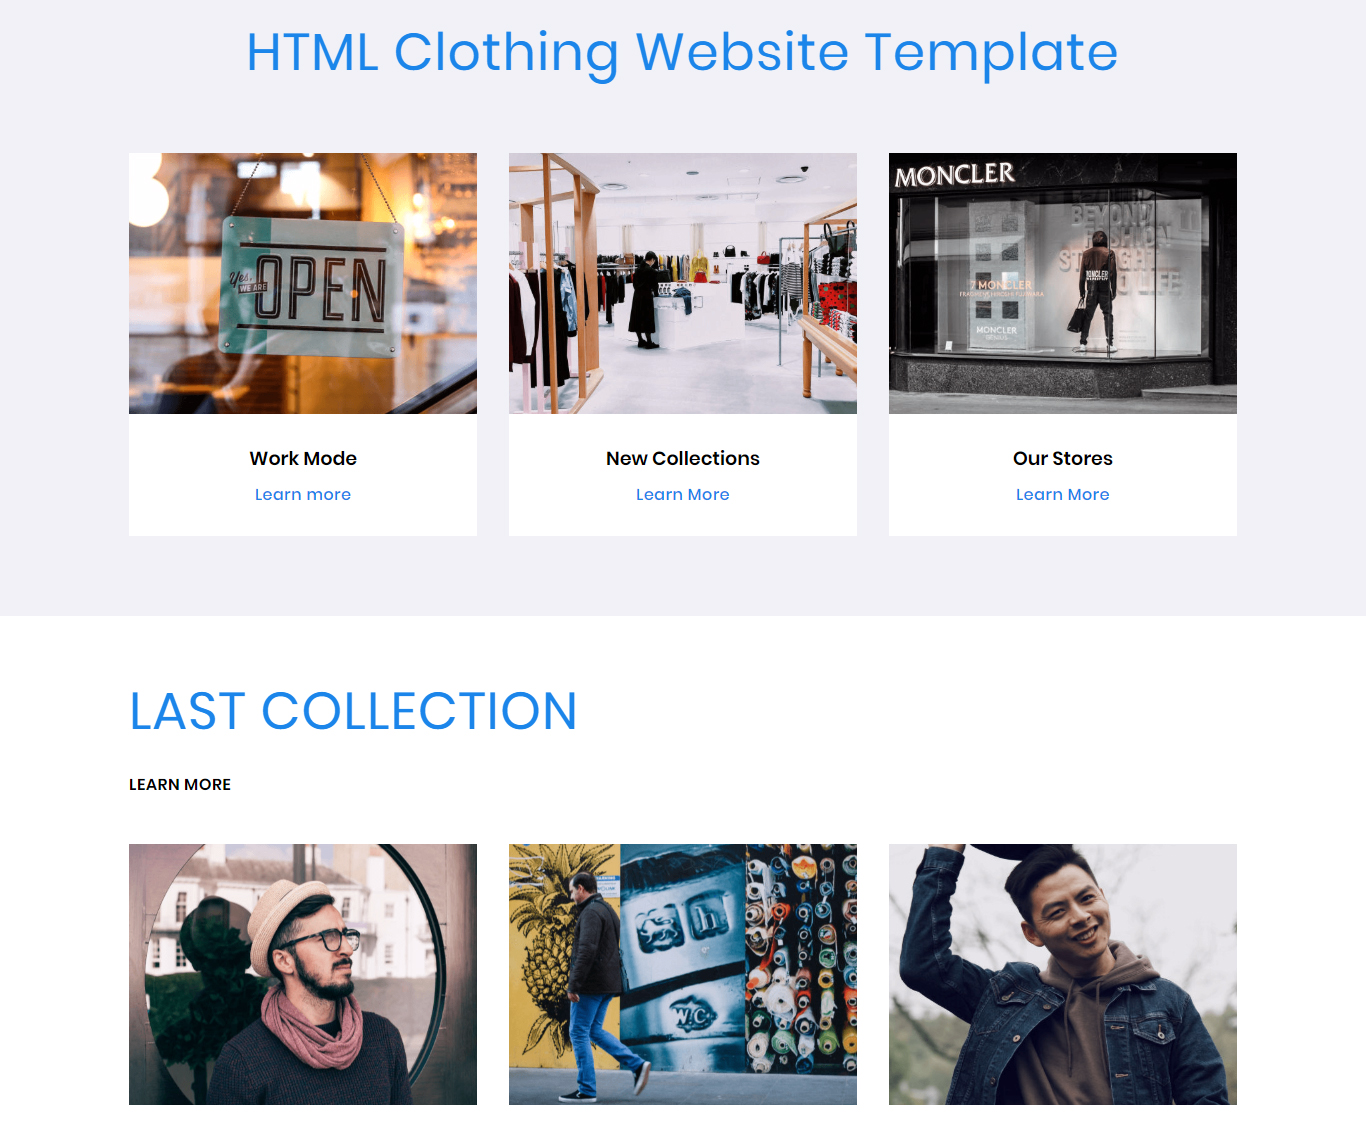 HTML Clothing Website Template